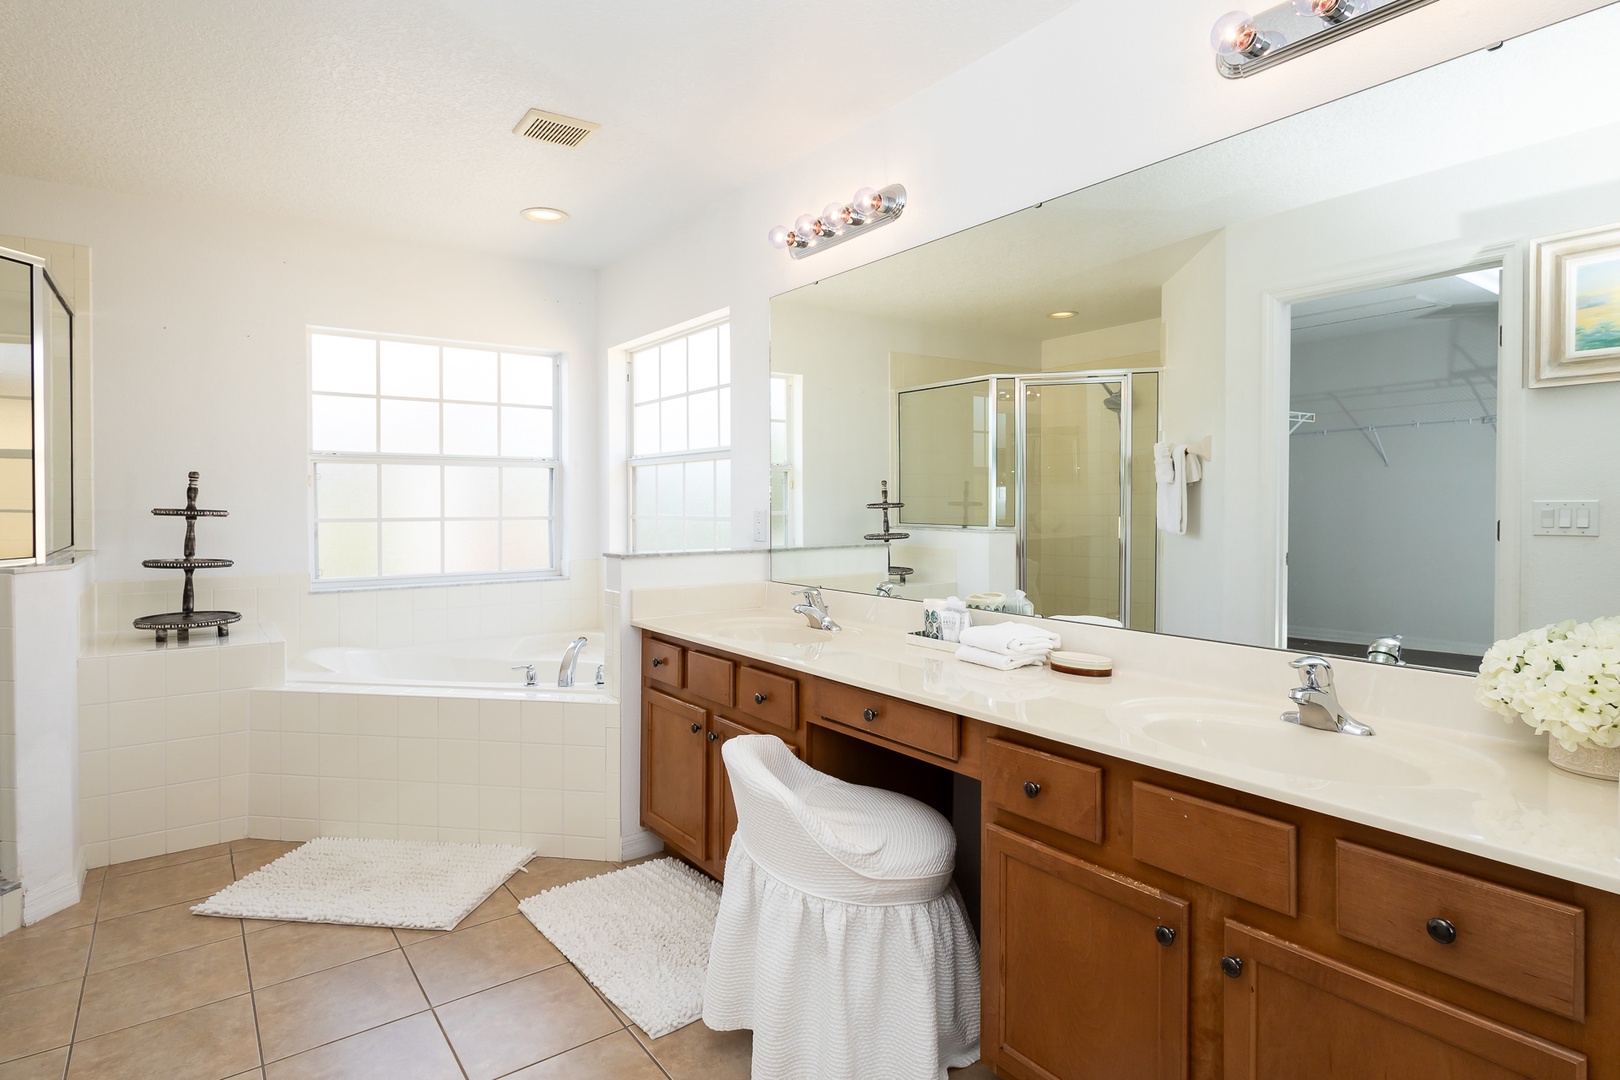 The master ensuite features a double vanity, shower, tub, & walk-in closet